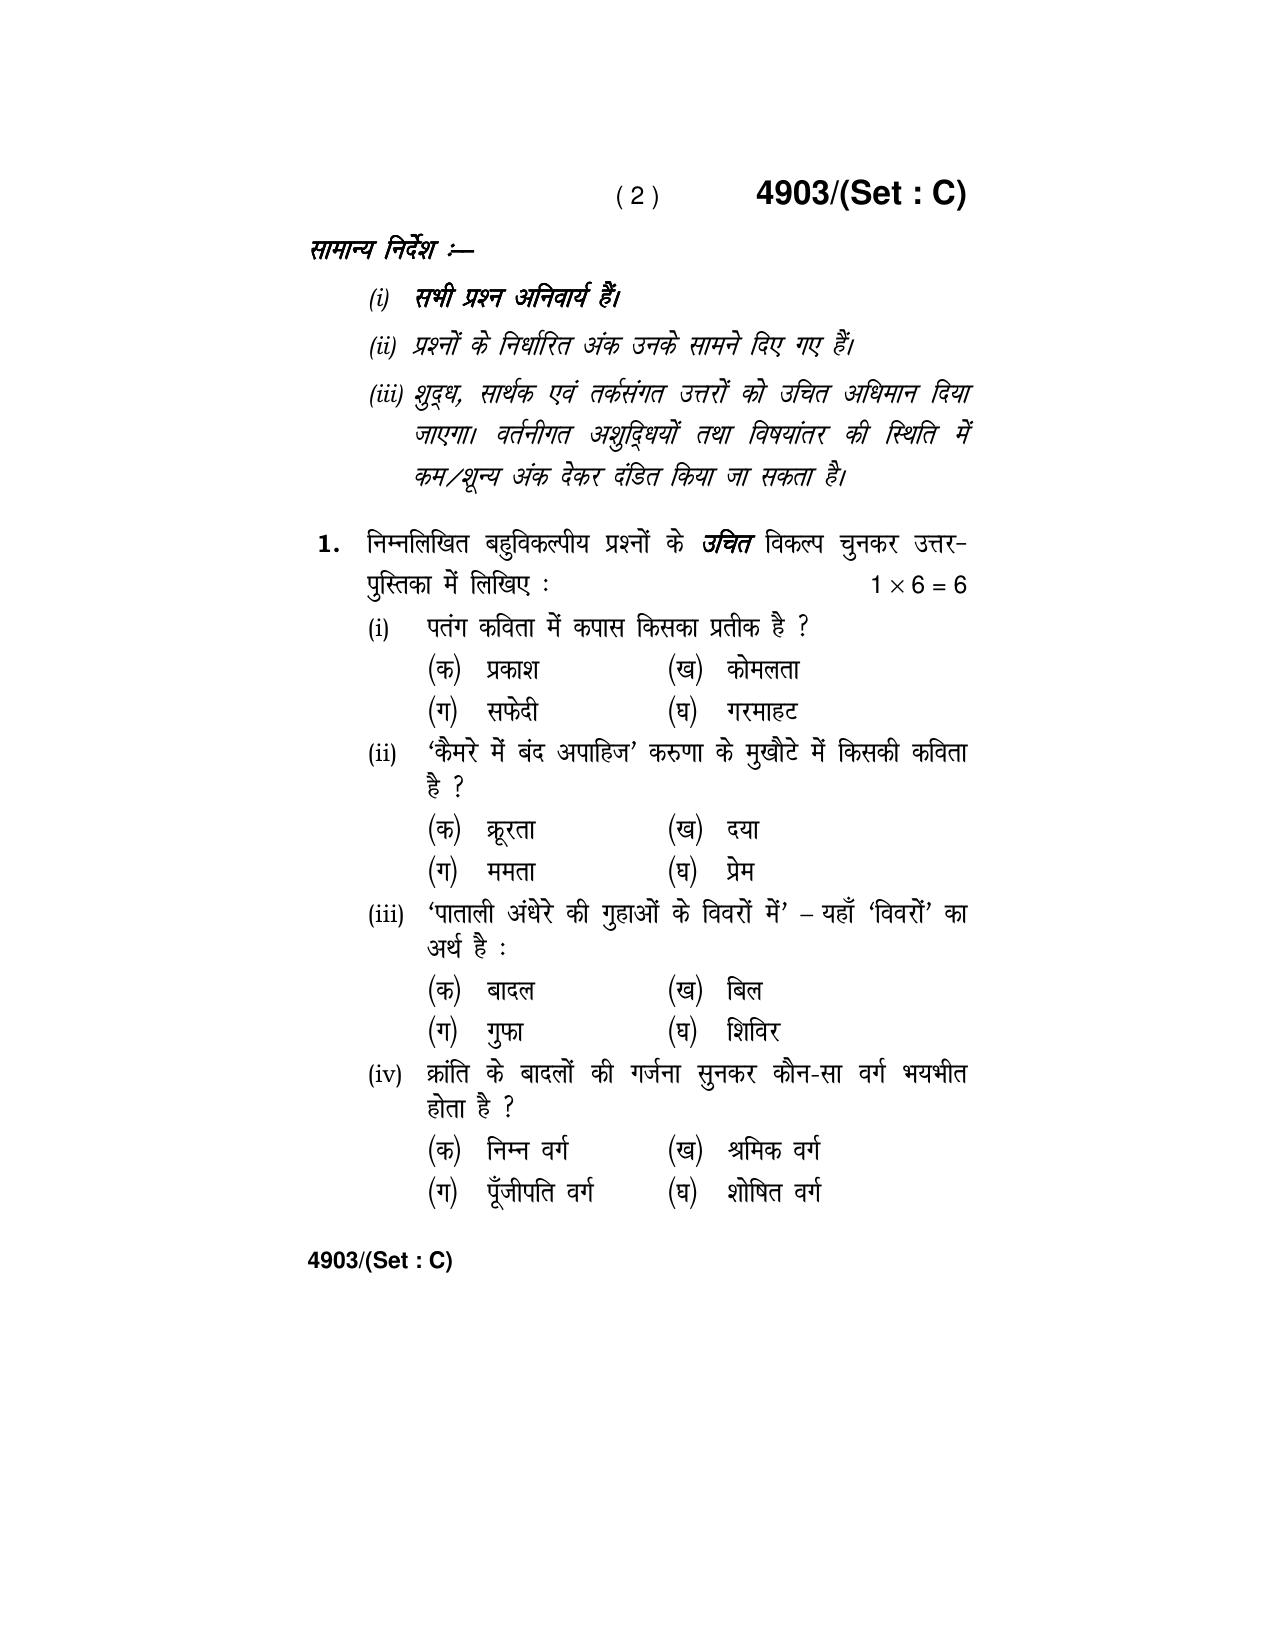 Haryana Board HBSE Class 12 Hindi Core 2020 Question Paper - Page 18